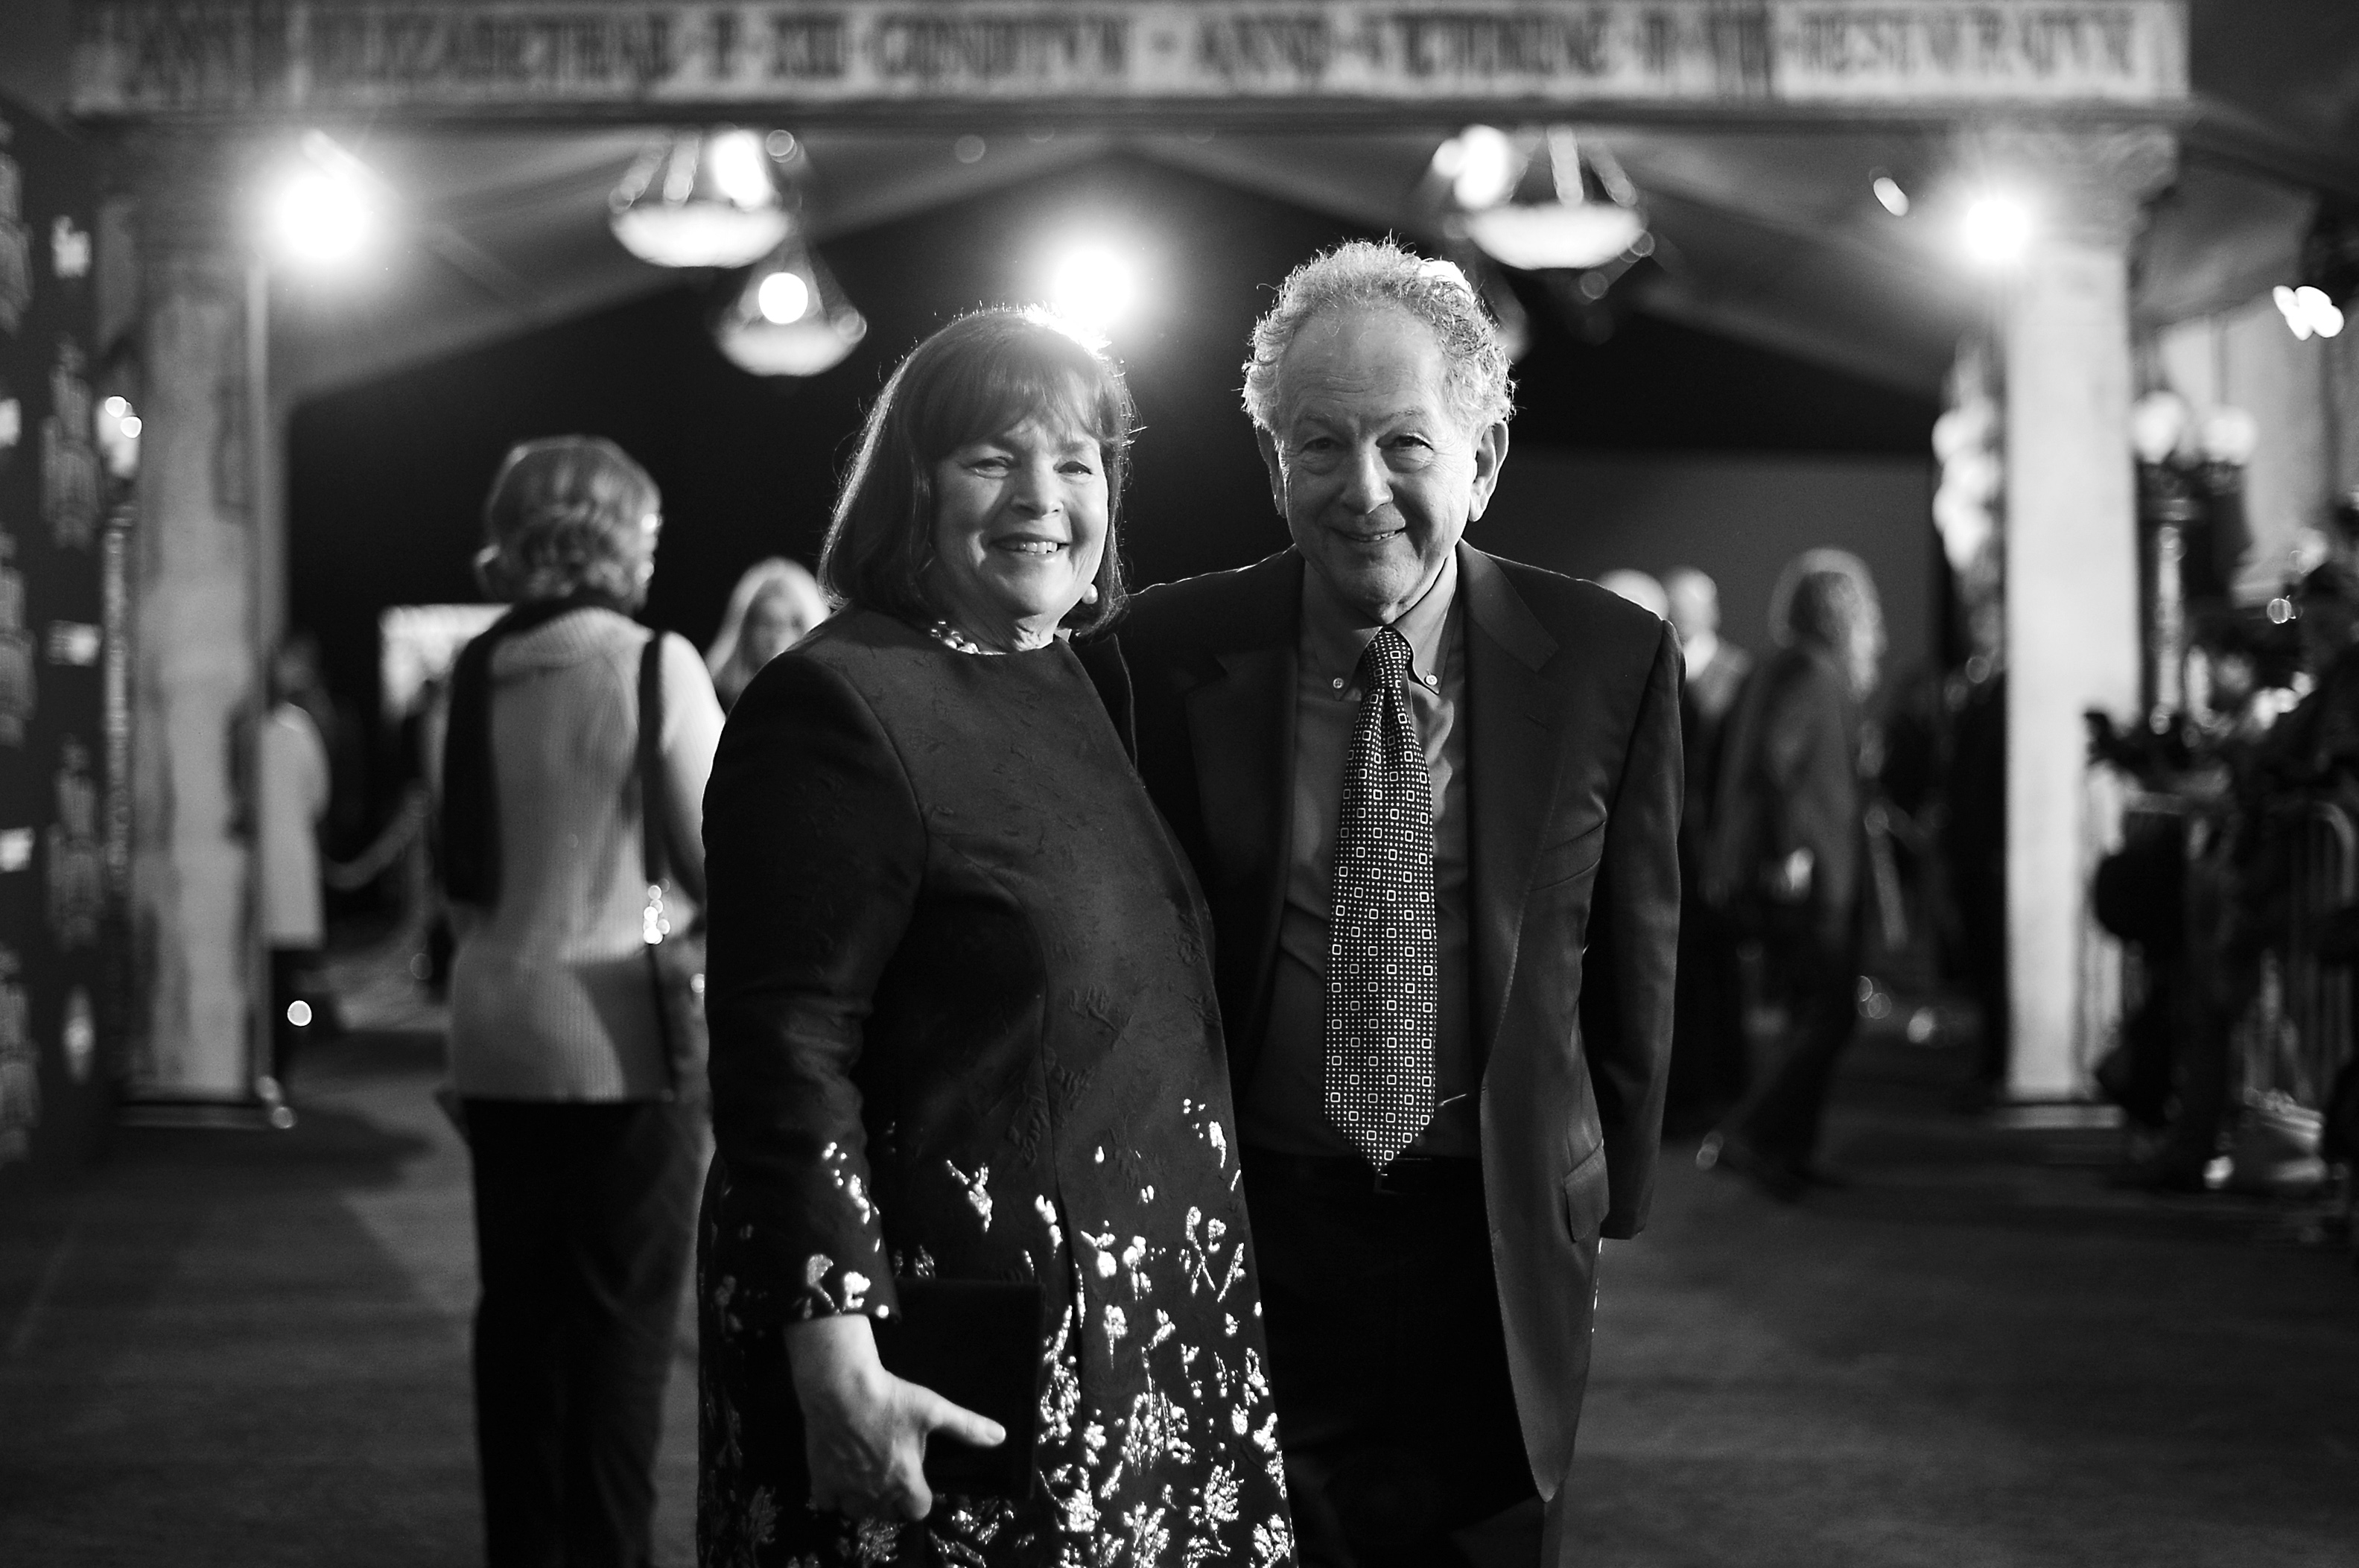 Ina Garten poses and smiles with her husband, Jeffrey.